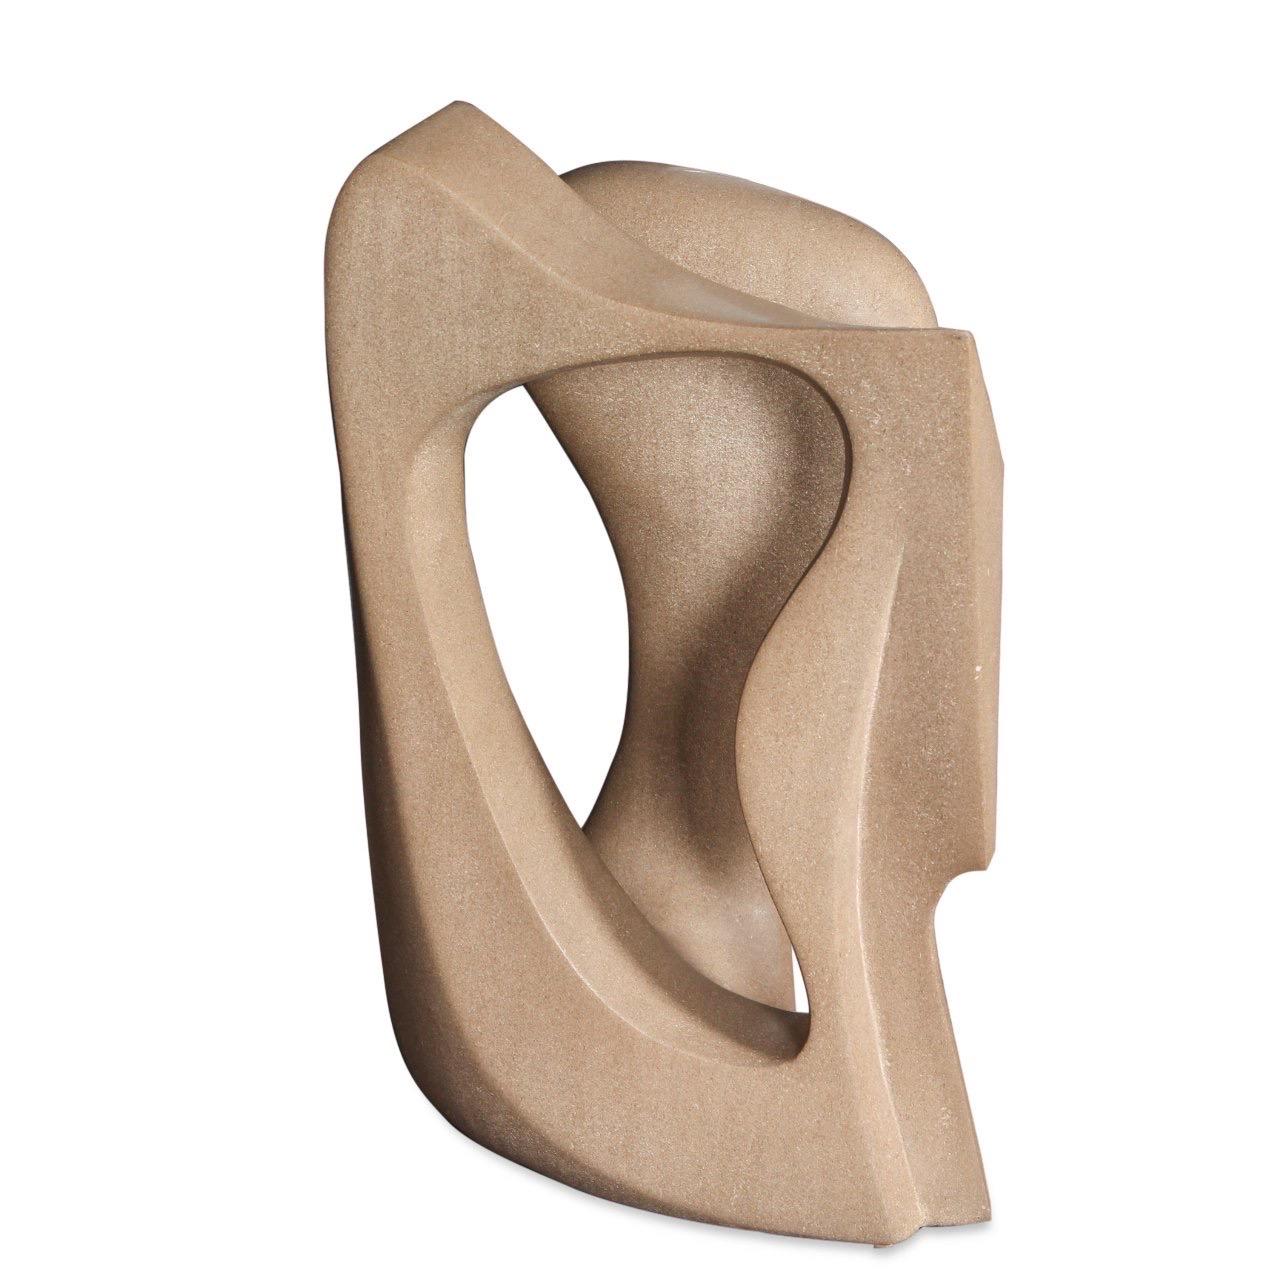 Robert Winslow hand carved abstract sculpture made of Tennessee marble.

Robert Winslow emerged as a recognized sculptor and painter in the late 1970’s. His paintings and sculptures are in the collections of many prominent corporations including